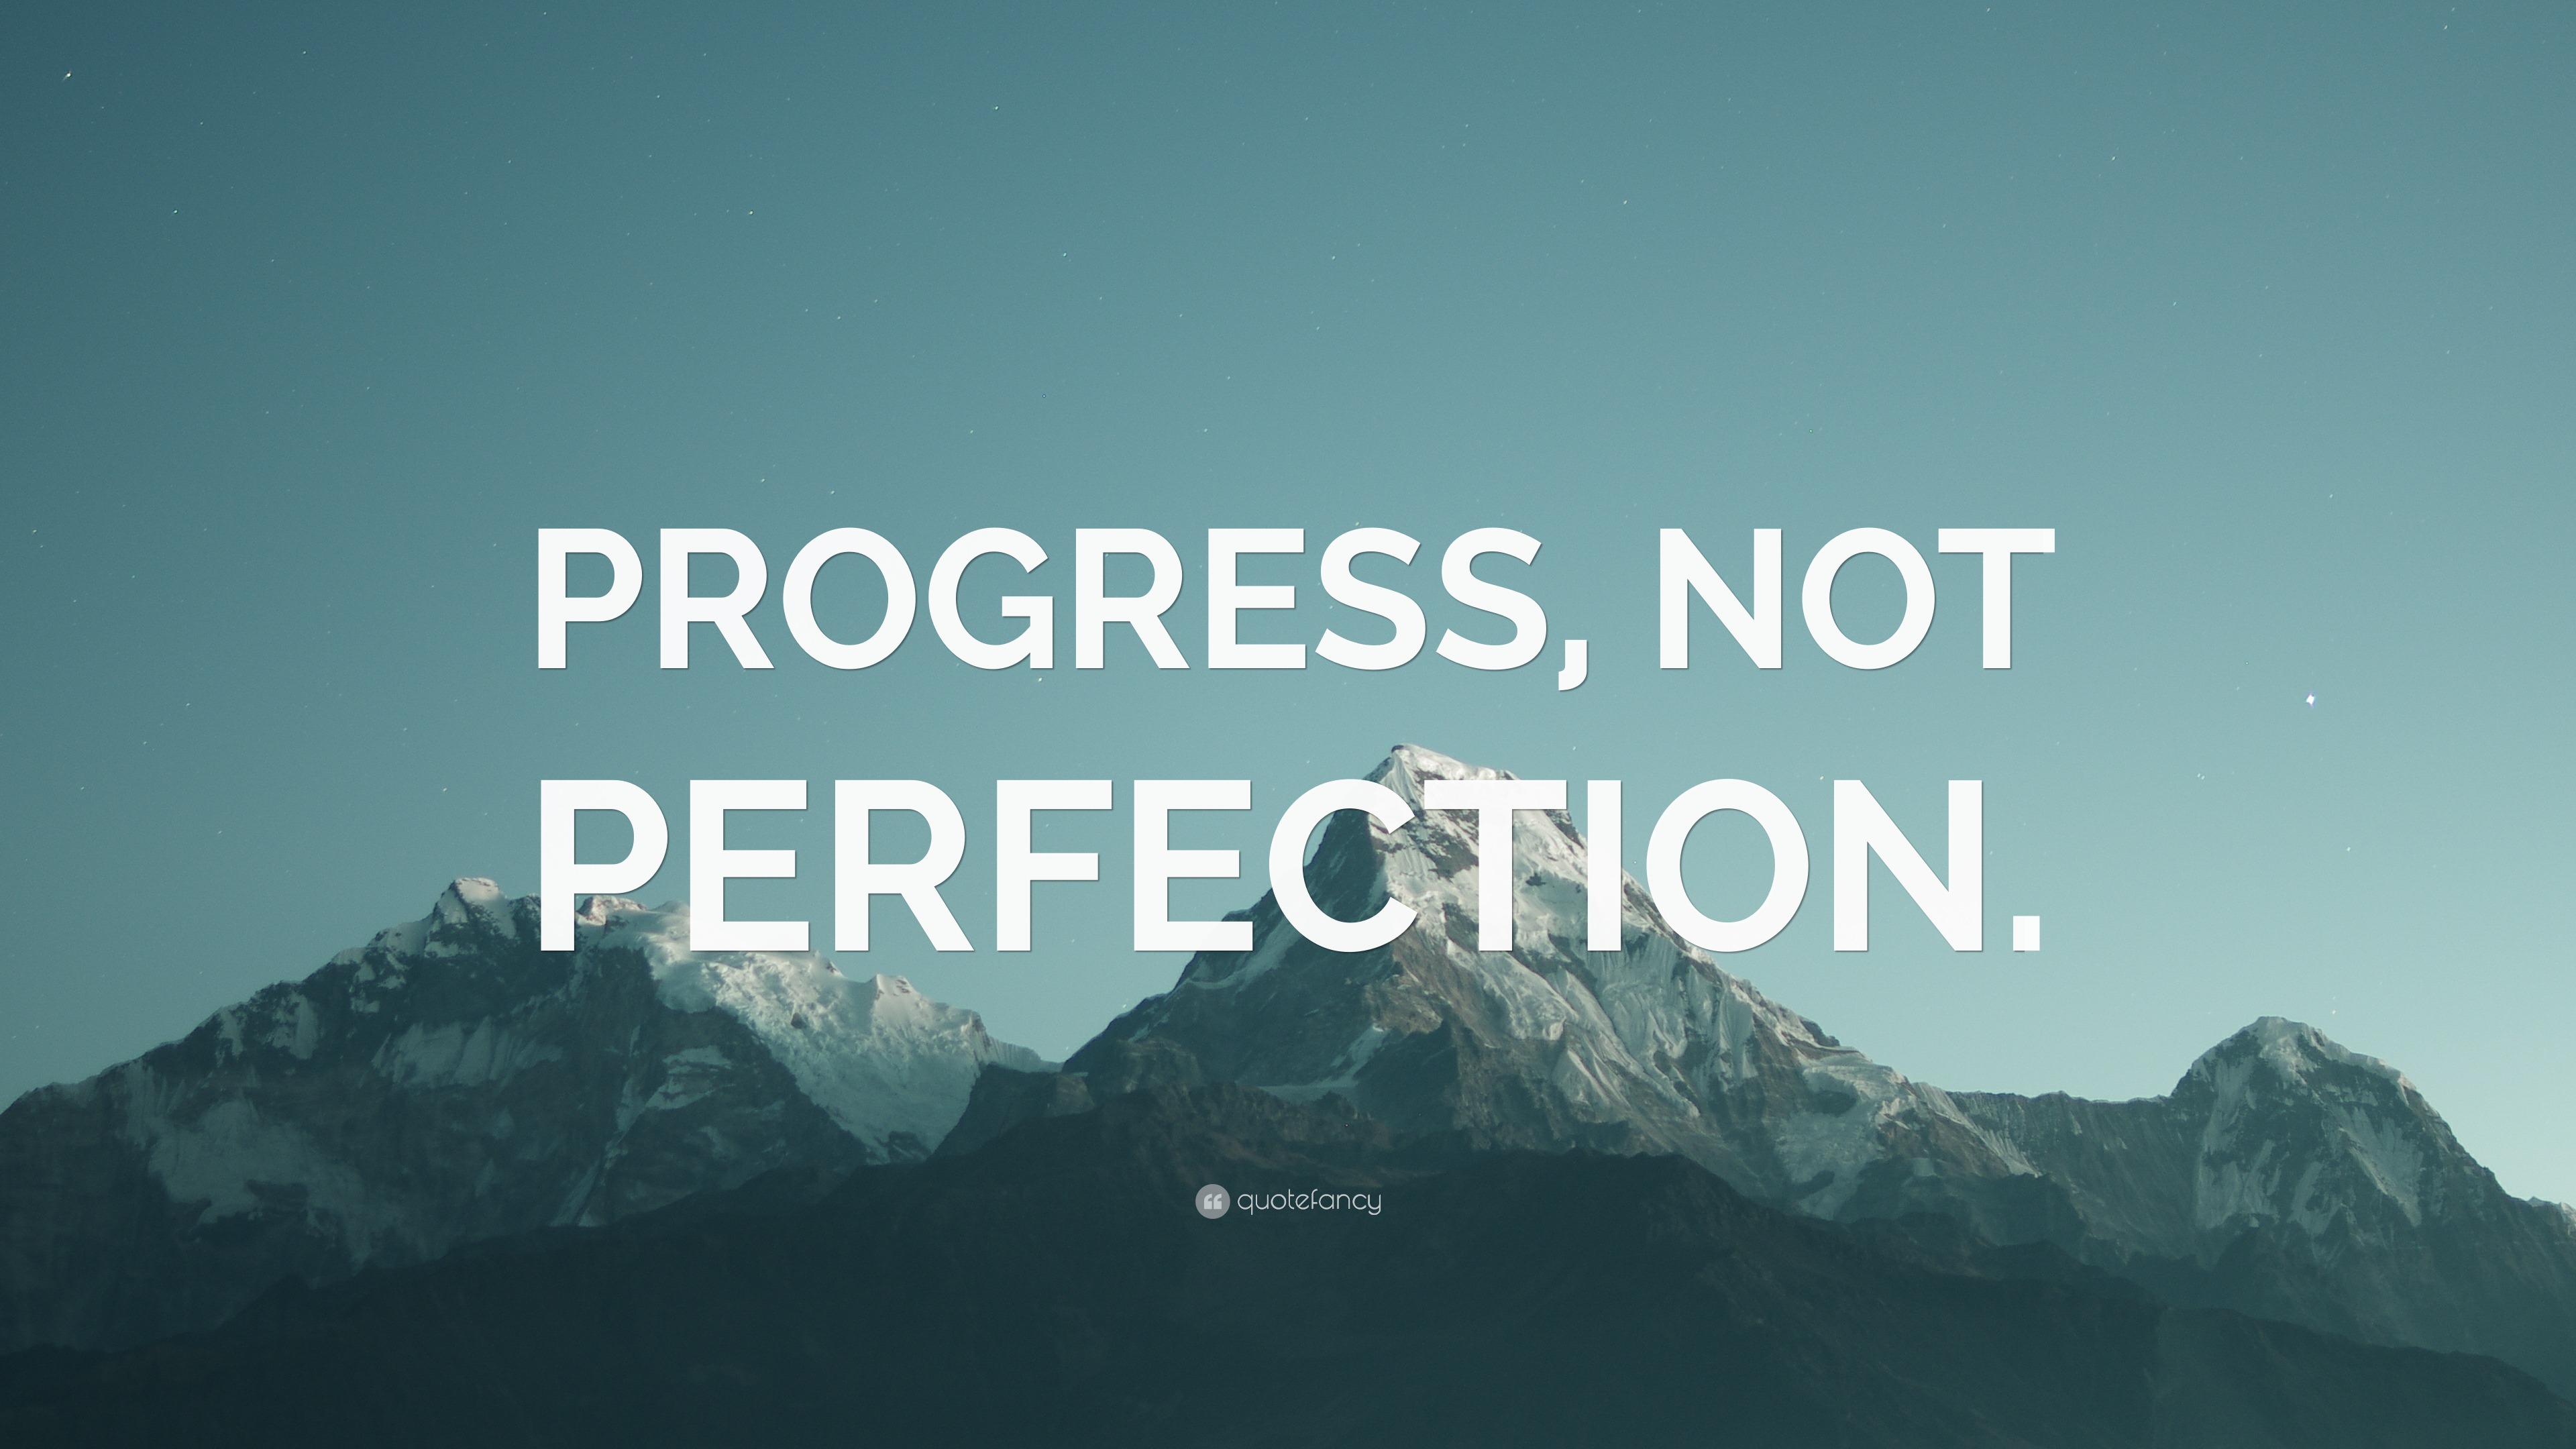 “PROGRESS, NOT PERFECTION.” Wallpaper by QuoteFancy